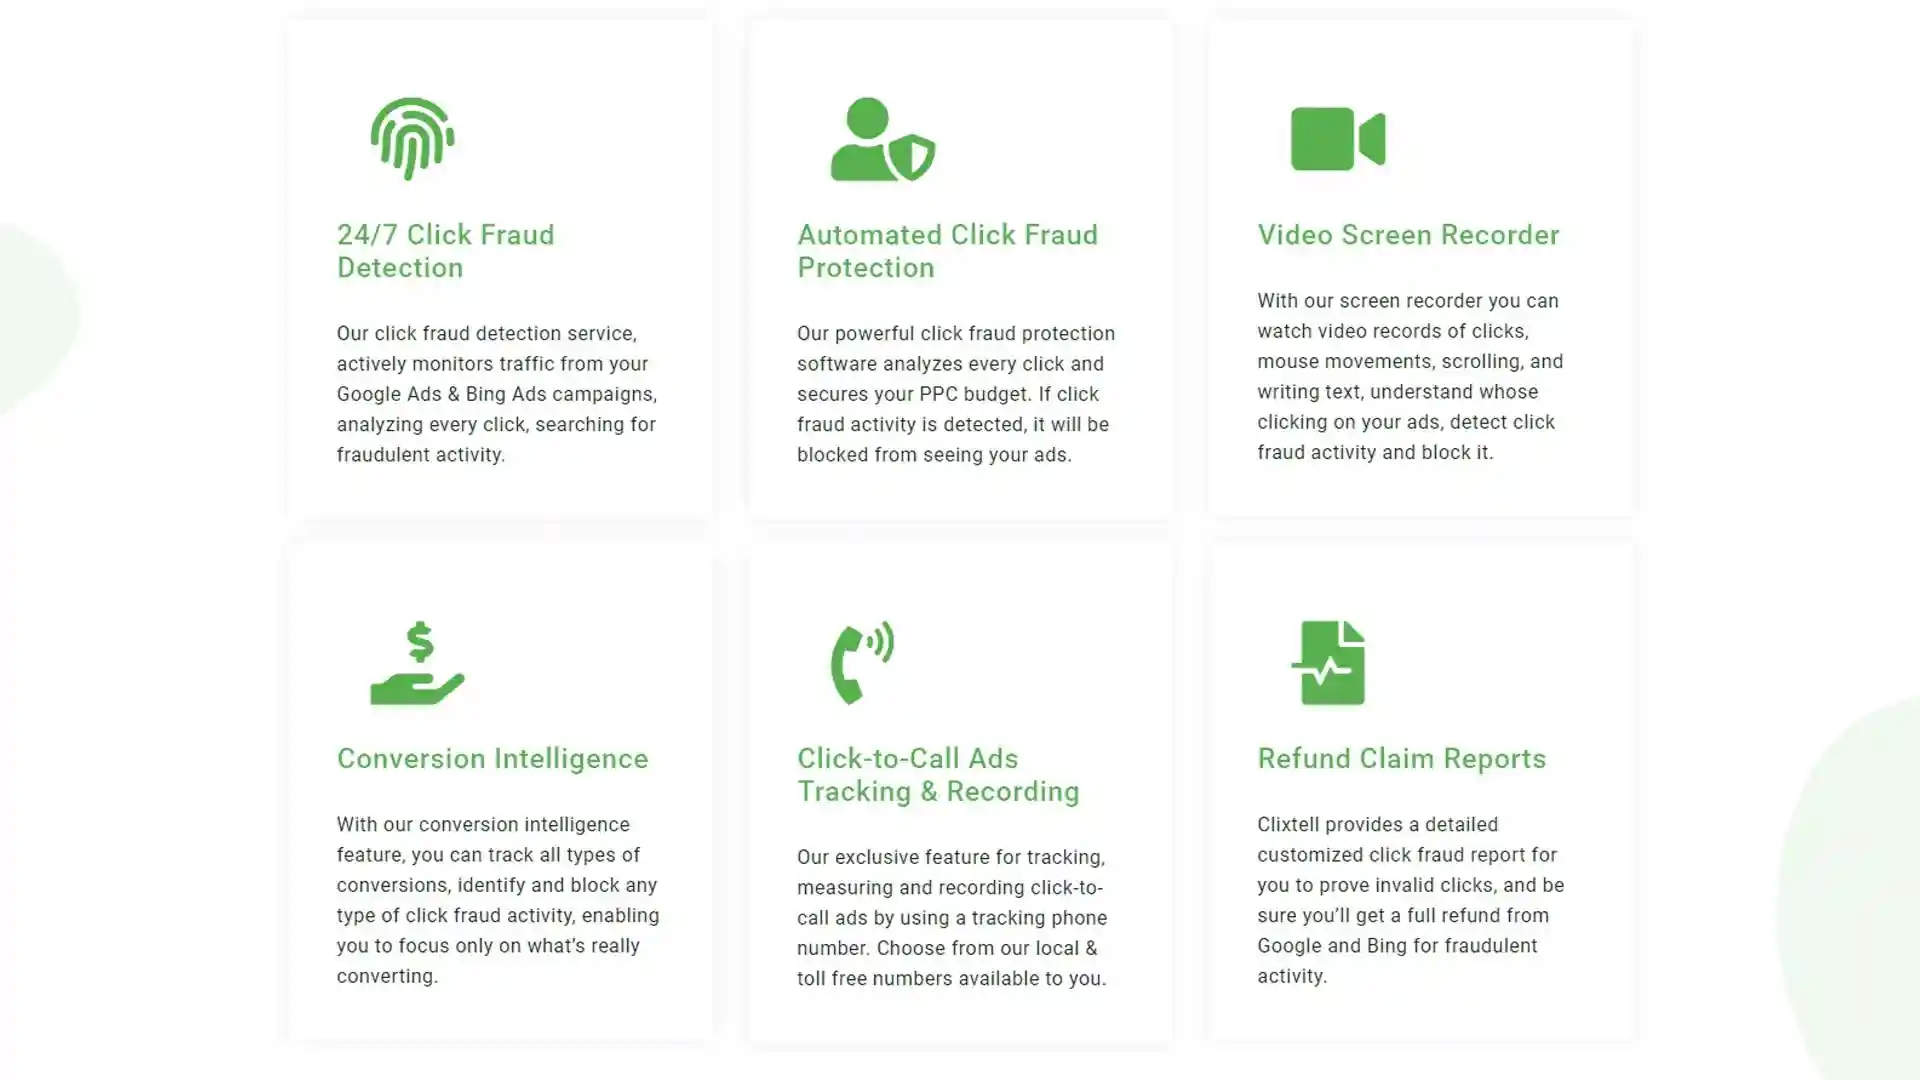 What are the criteria for choosing the best click fraud protection service